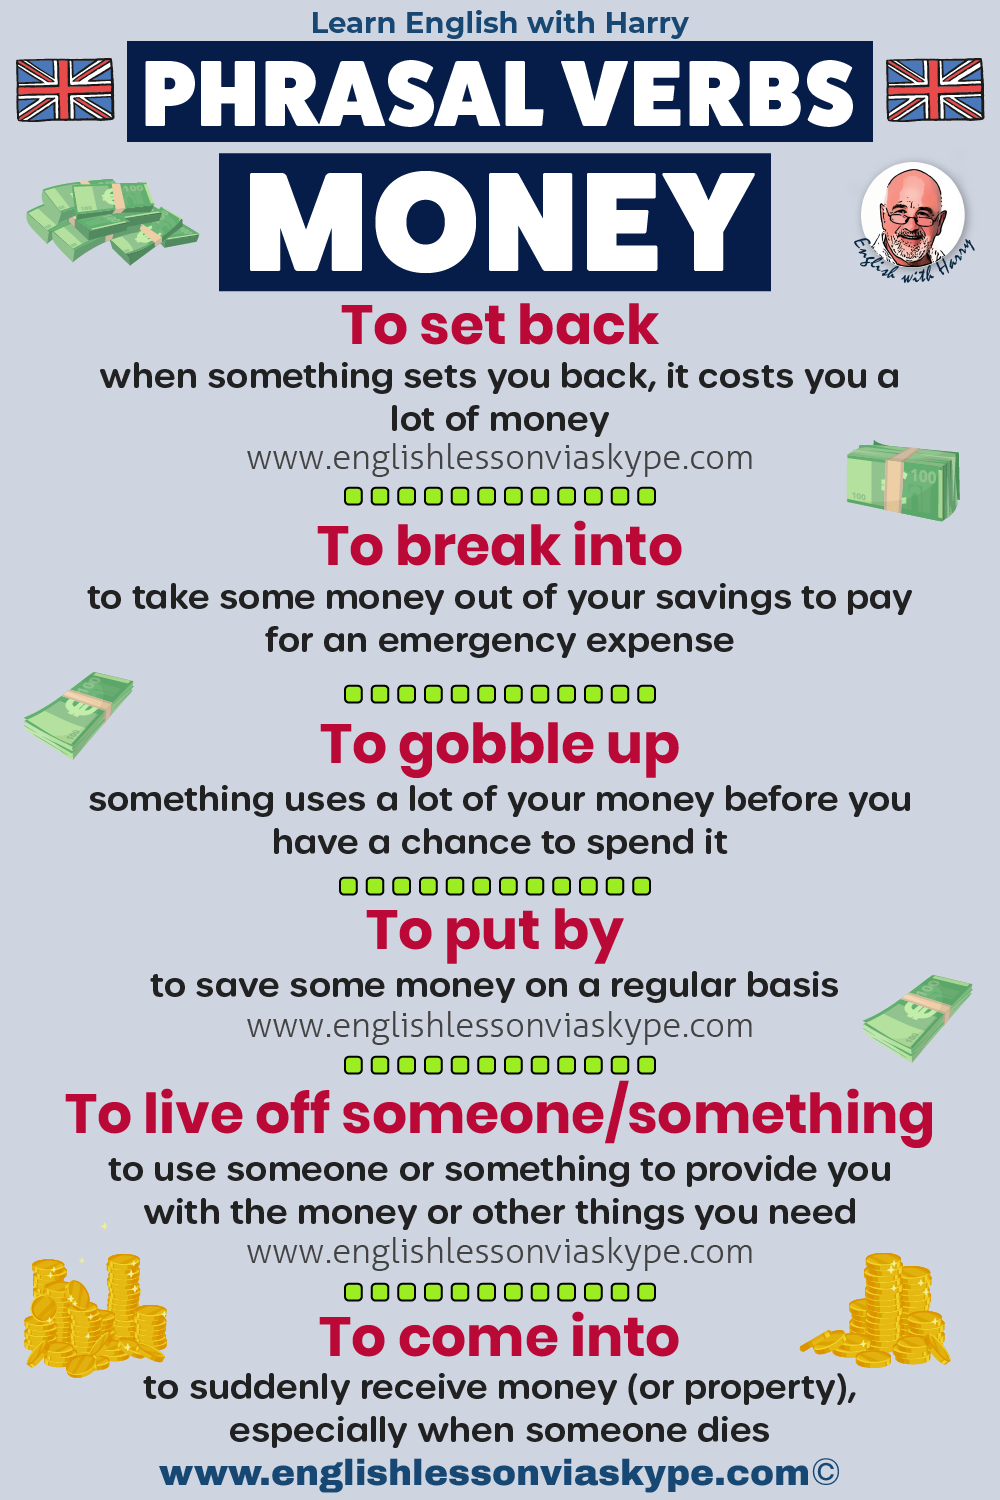 Phrasal verbs related to money. With meanings and examples. Study English advanced level. Speak better English with Harry transcript. www.englishlessonviaskype.com #learnenglish #englishlessons